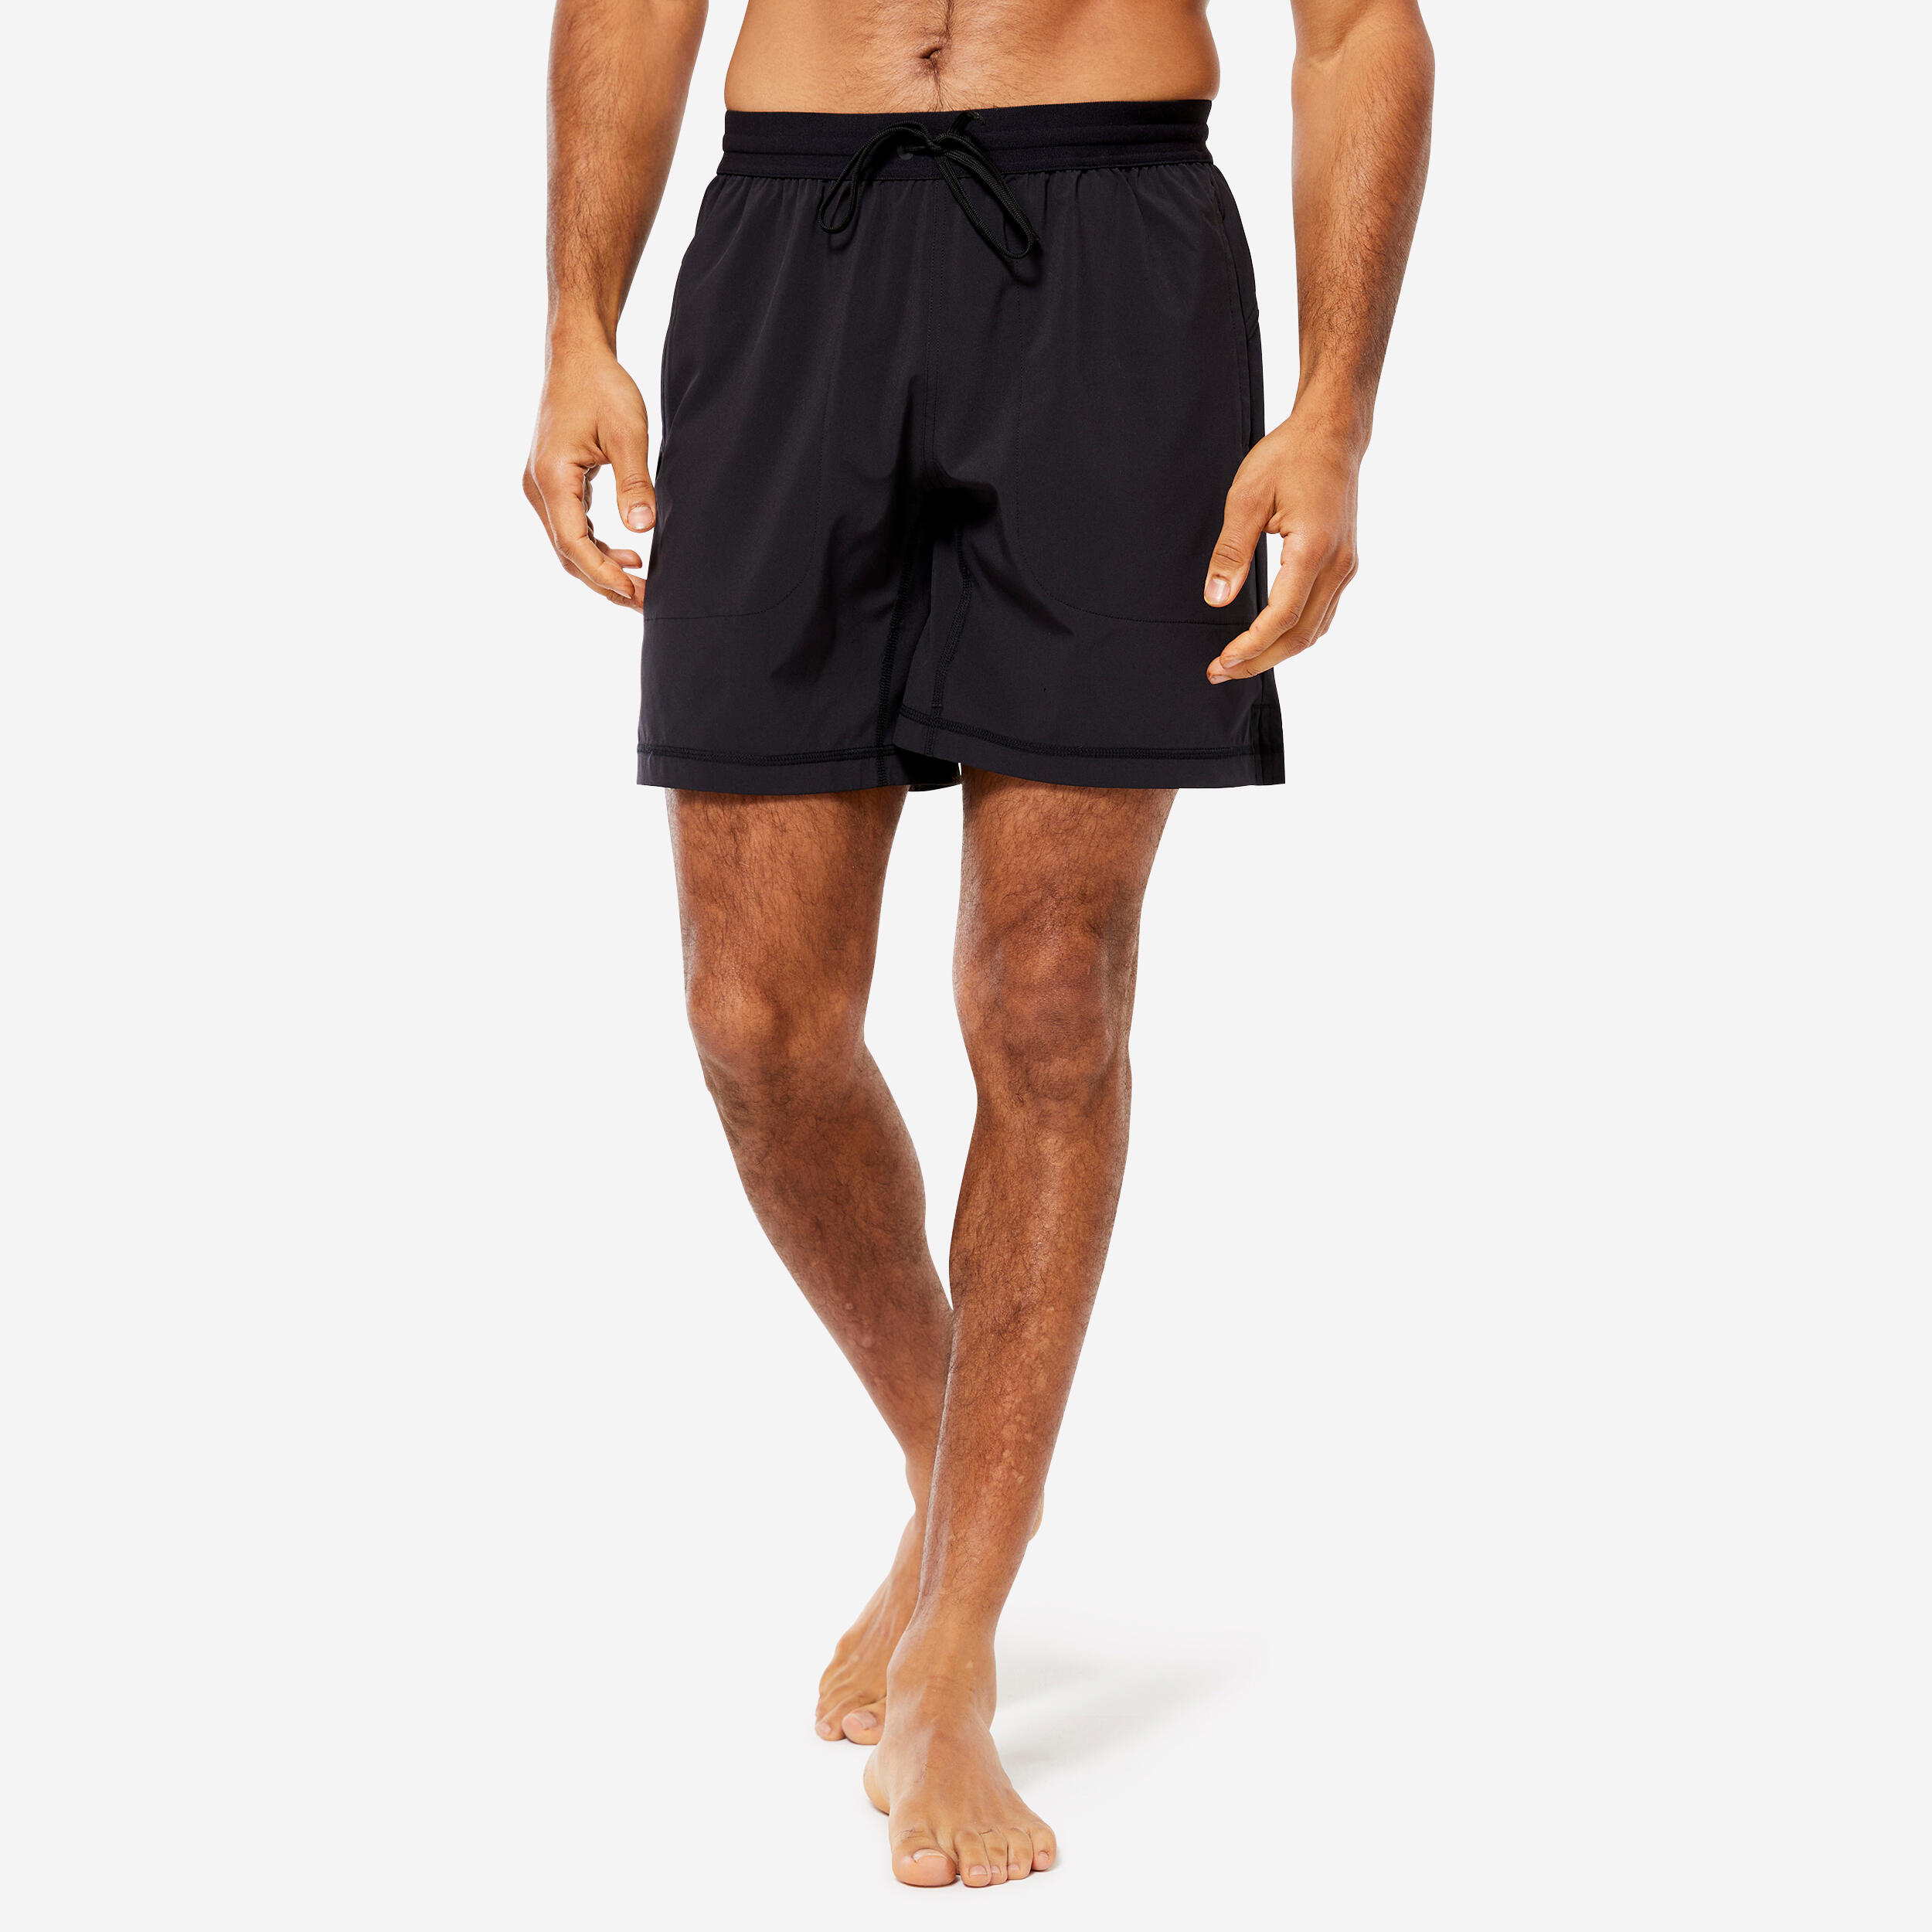 Men's Hot Yoga Ultra-Lightweight Shorts with Built-in Briefs - Black 1/6